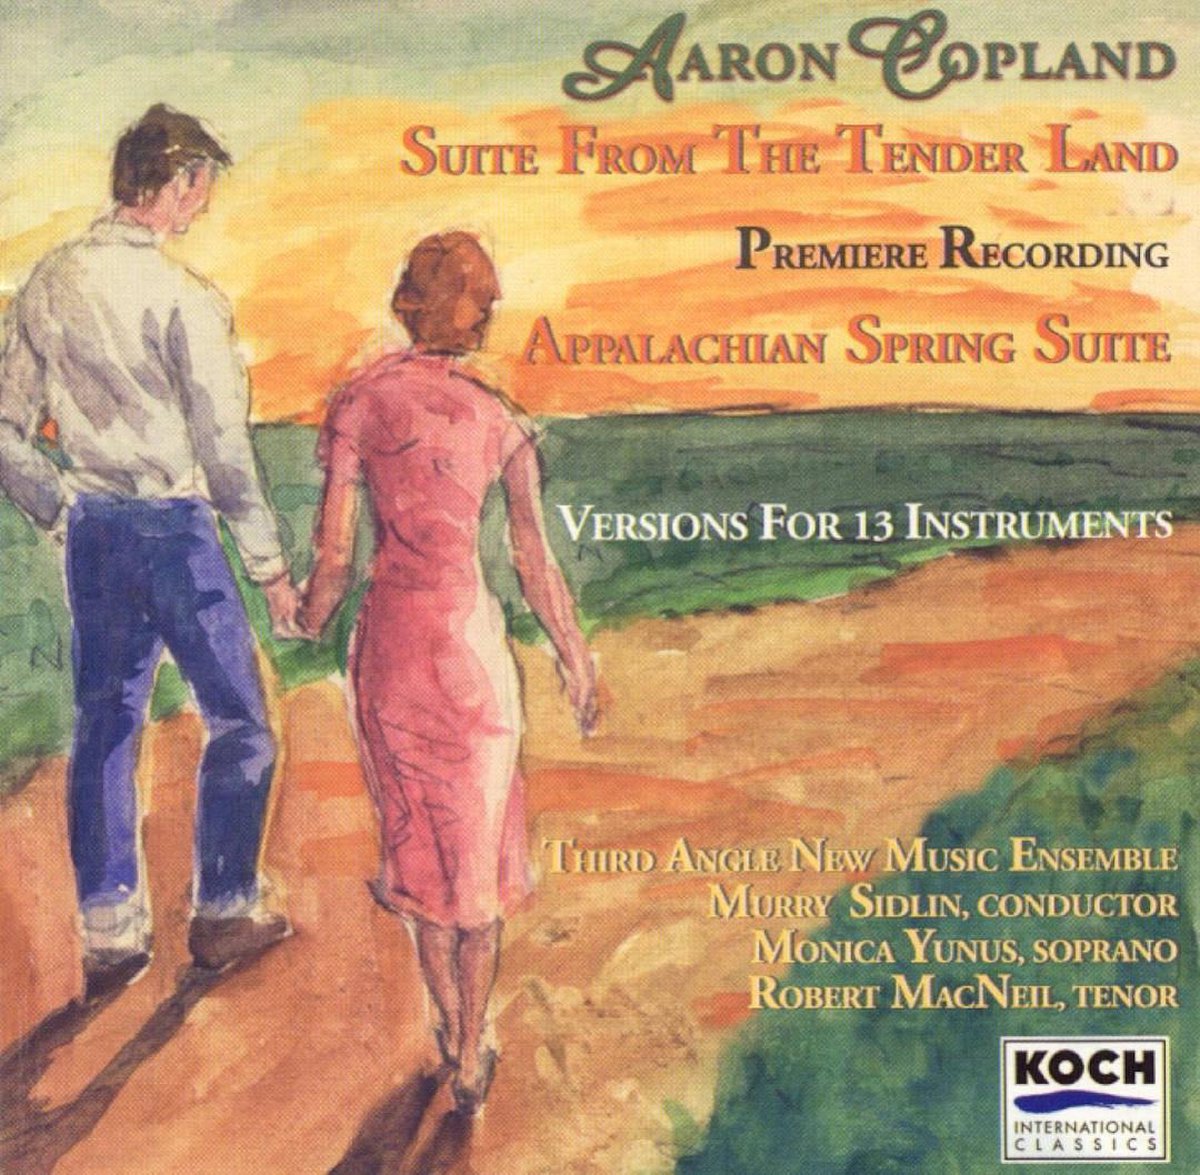 Afbeelding van product Copland: Suite from the Tender Land; Appalachian Spring Suite  - Third Angle New Music Ensemble